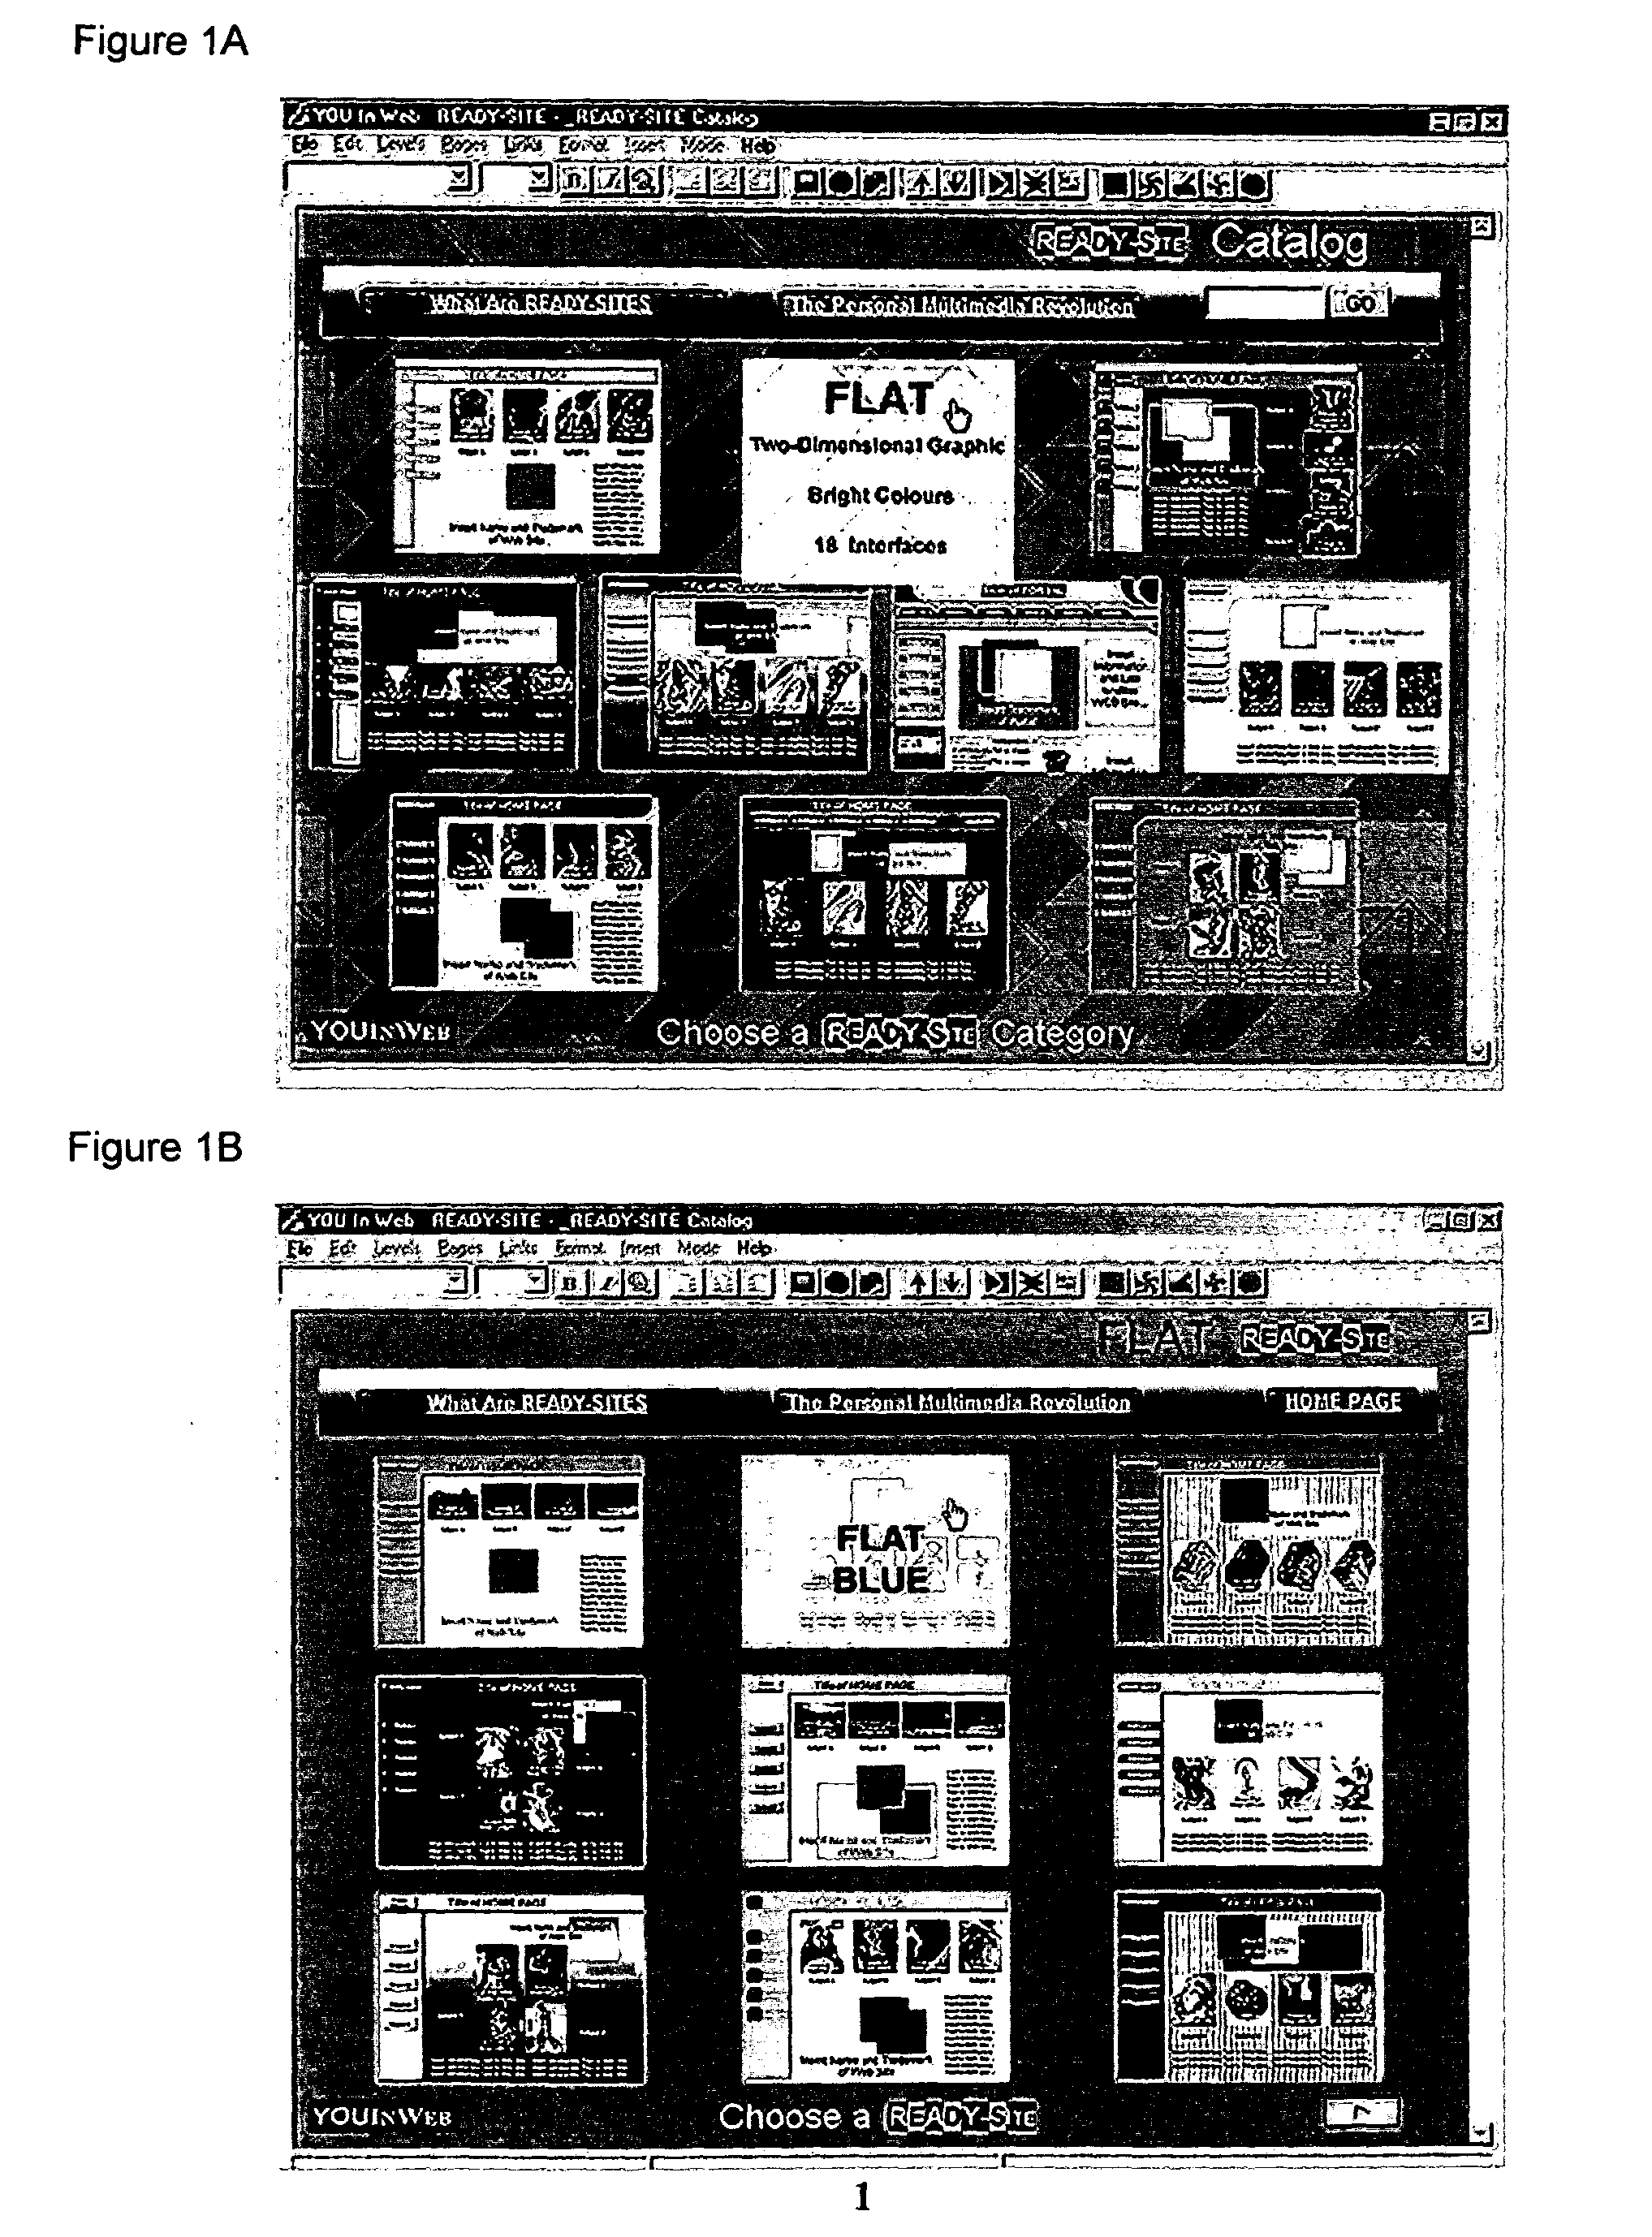 System, method and computer program product for the immediate creation and management of websites and multimedia audiovisuals for CD-ROM ready-to-use and already perfectly operating